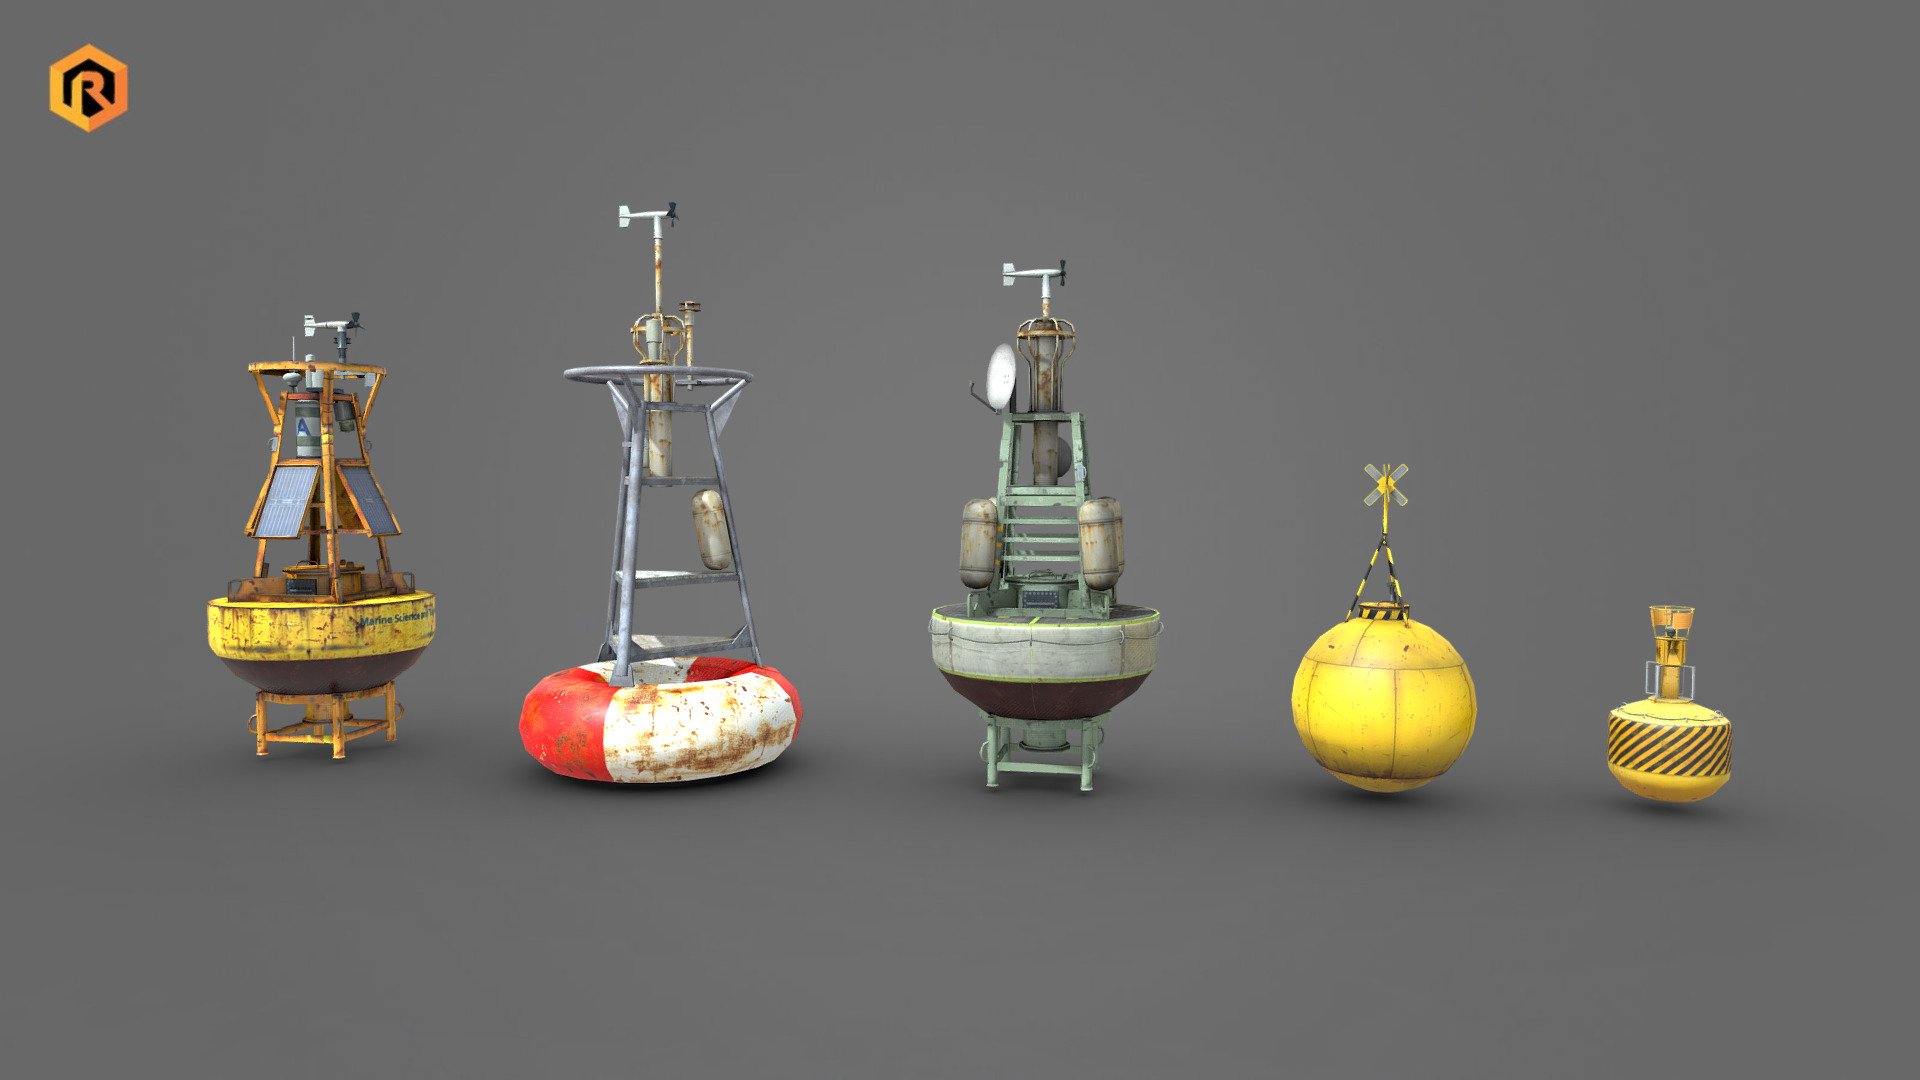 Low-poly 3D model collection of 5 ocean buoys. There are some meteorological buoys and some common buoys.

Models are best for use in games and other VR / AR, real-time applications such as Unity or Unreal Engine.

Collection includes:




Ocean Buoy 1 - 2048x2048 diffuse, 3000 Triangle, 1890 Vertices

Ocean Buoy 2 - 2048x2048 diffuse, 2596 Triangles, 1500 Vertices

Ocean Buoy 3 - 2048x2048 diffuse, 3800 Triangles, 2284 Vertices

Ocean Buoy 4 - 1024x1024 diffuse, 1155 Triangles, 661 Vertices

Ocean Buoy 5 - 1024x1024 diffuse, 1490 Triangles, 889 Vertices

Models info:




Each model is one mesh.

Models are completely unwrapped.

Models are fully textured with all materials applied.

Lot of additional file formats included (Blender, Unity, Maya etc.)

More file formats are available in additional zip file on product page.

Please feel free to contact me if you have any questions or need any support for this asset.

Support e-mail: support@rescue3d.com - 5 Ocean Buoys Collection - Buy Royalty Free 3D model by Rescue3D Assets (@rescue3d) 3d model